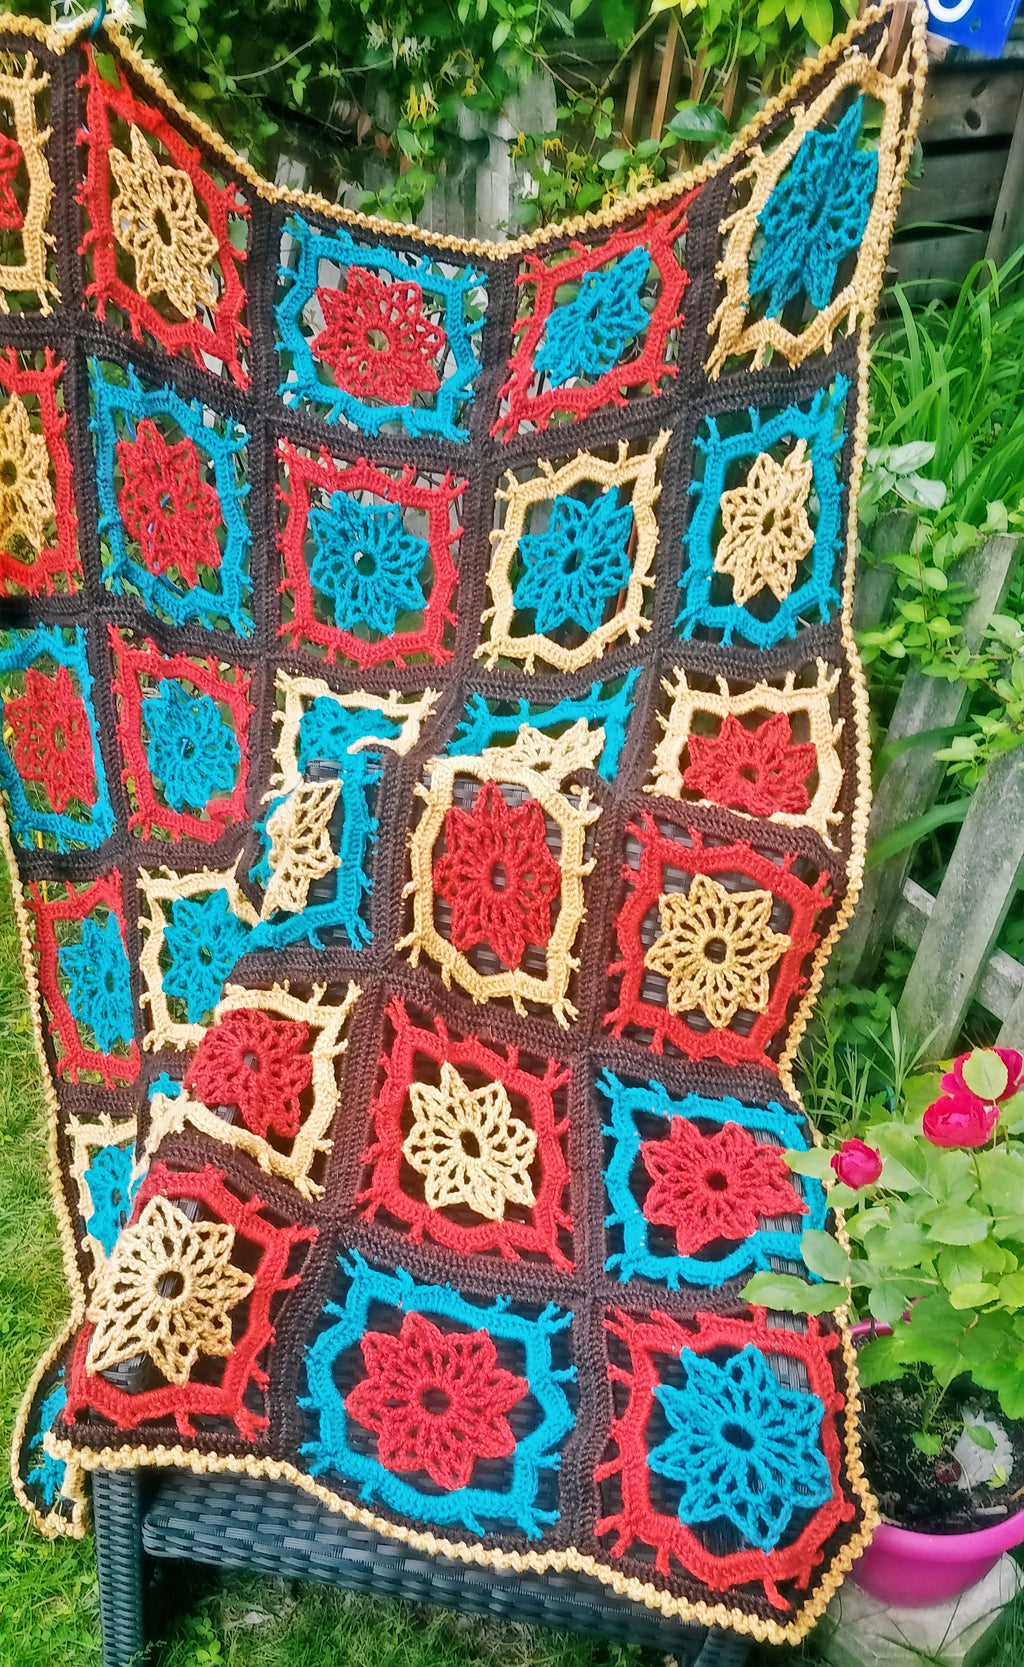 Cardamom and Coriander Afghan - Designed by Rose Tussing